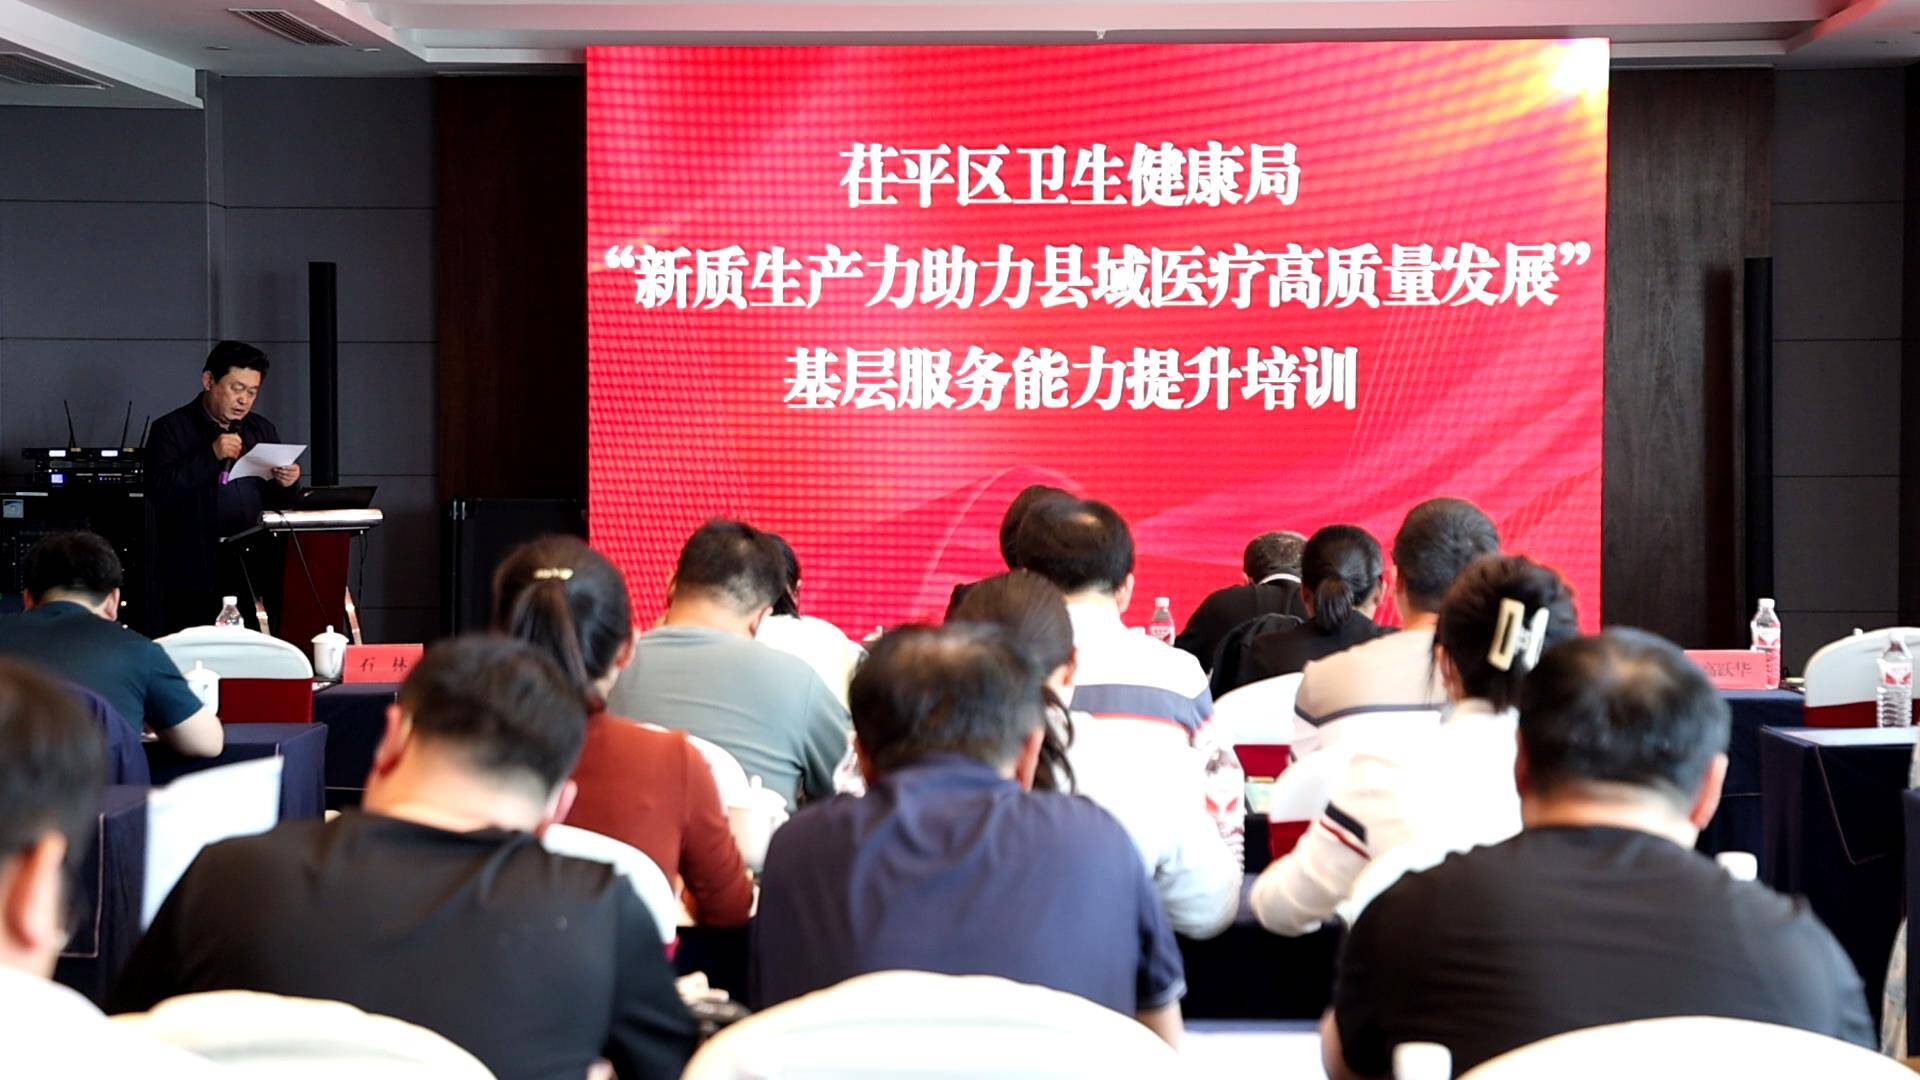  Chiping District of Liaocheng City held a tour of new quality productivity to help the high-quality development of county medical care and improve the grass-roots health capacity of Chiping District